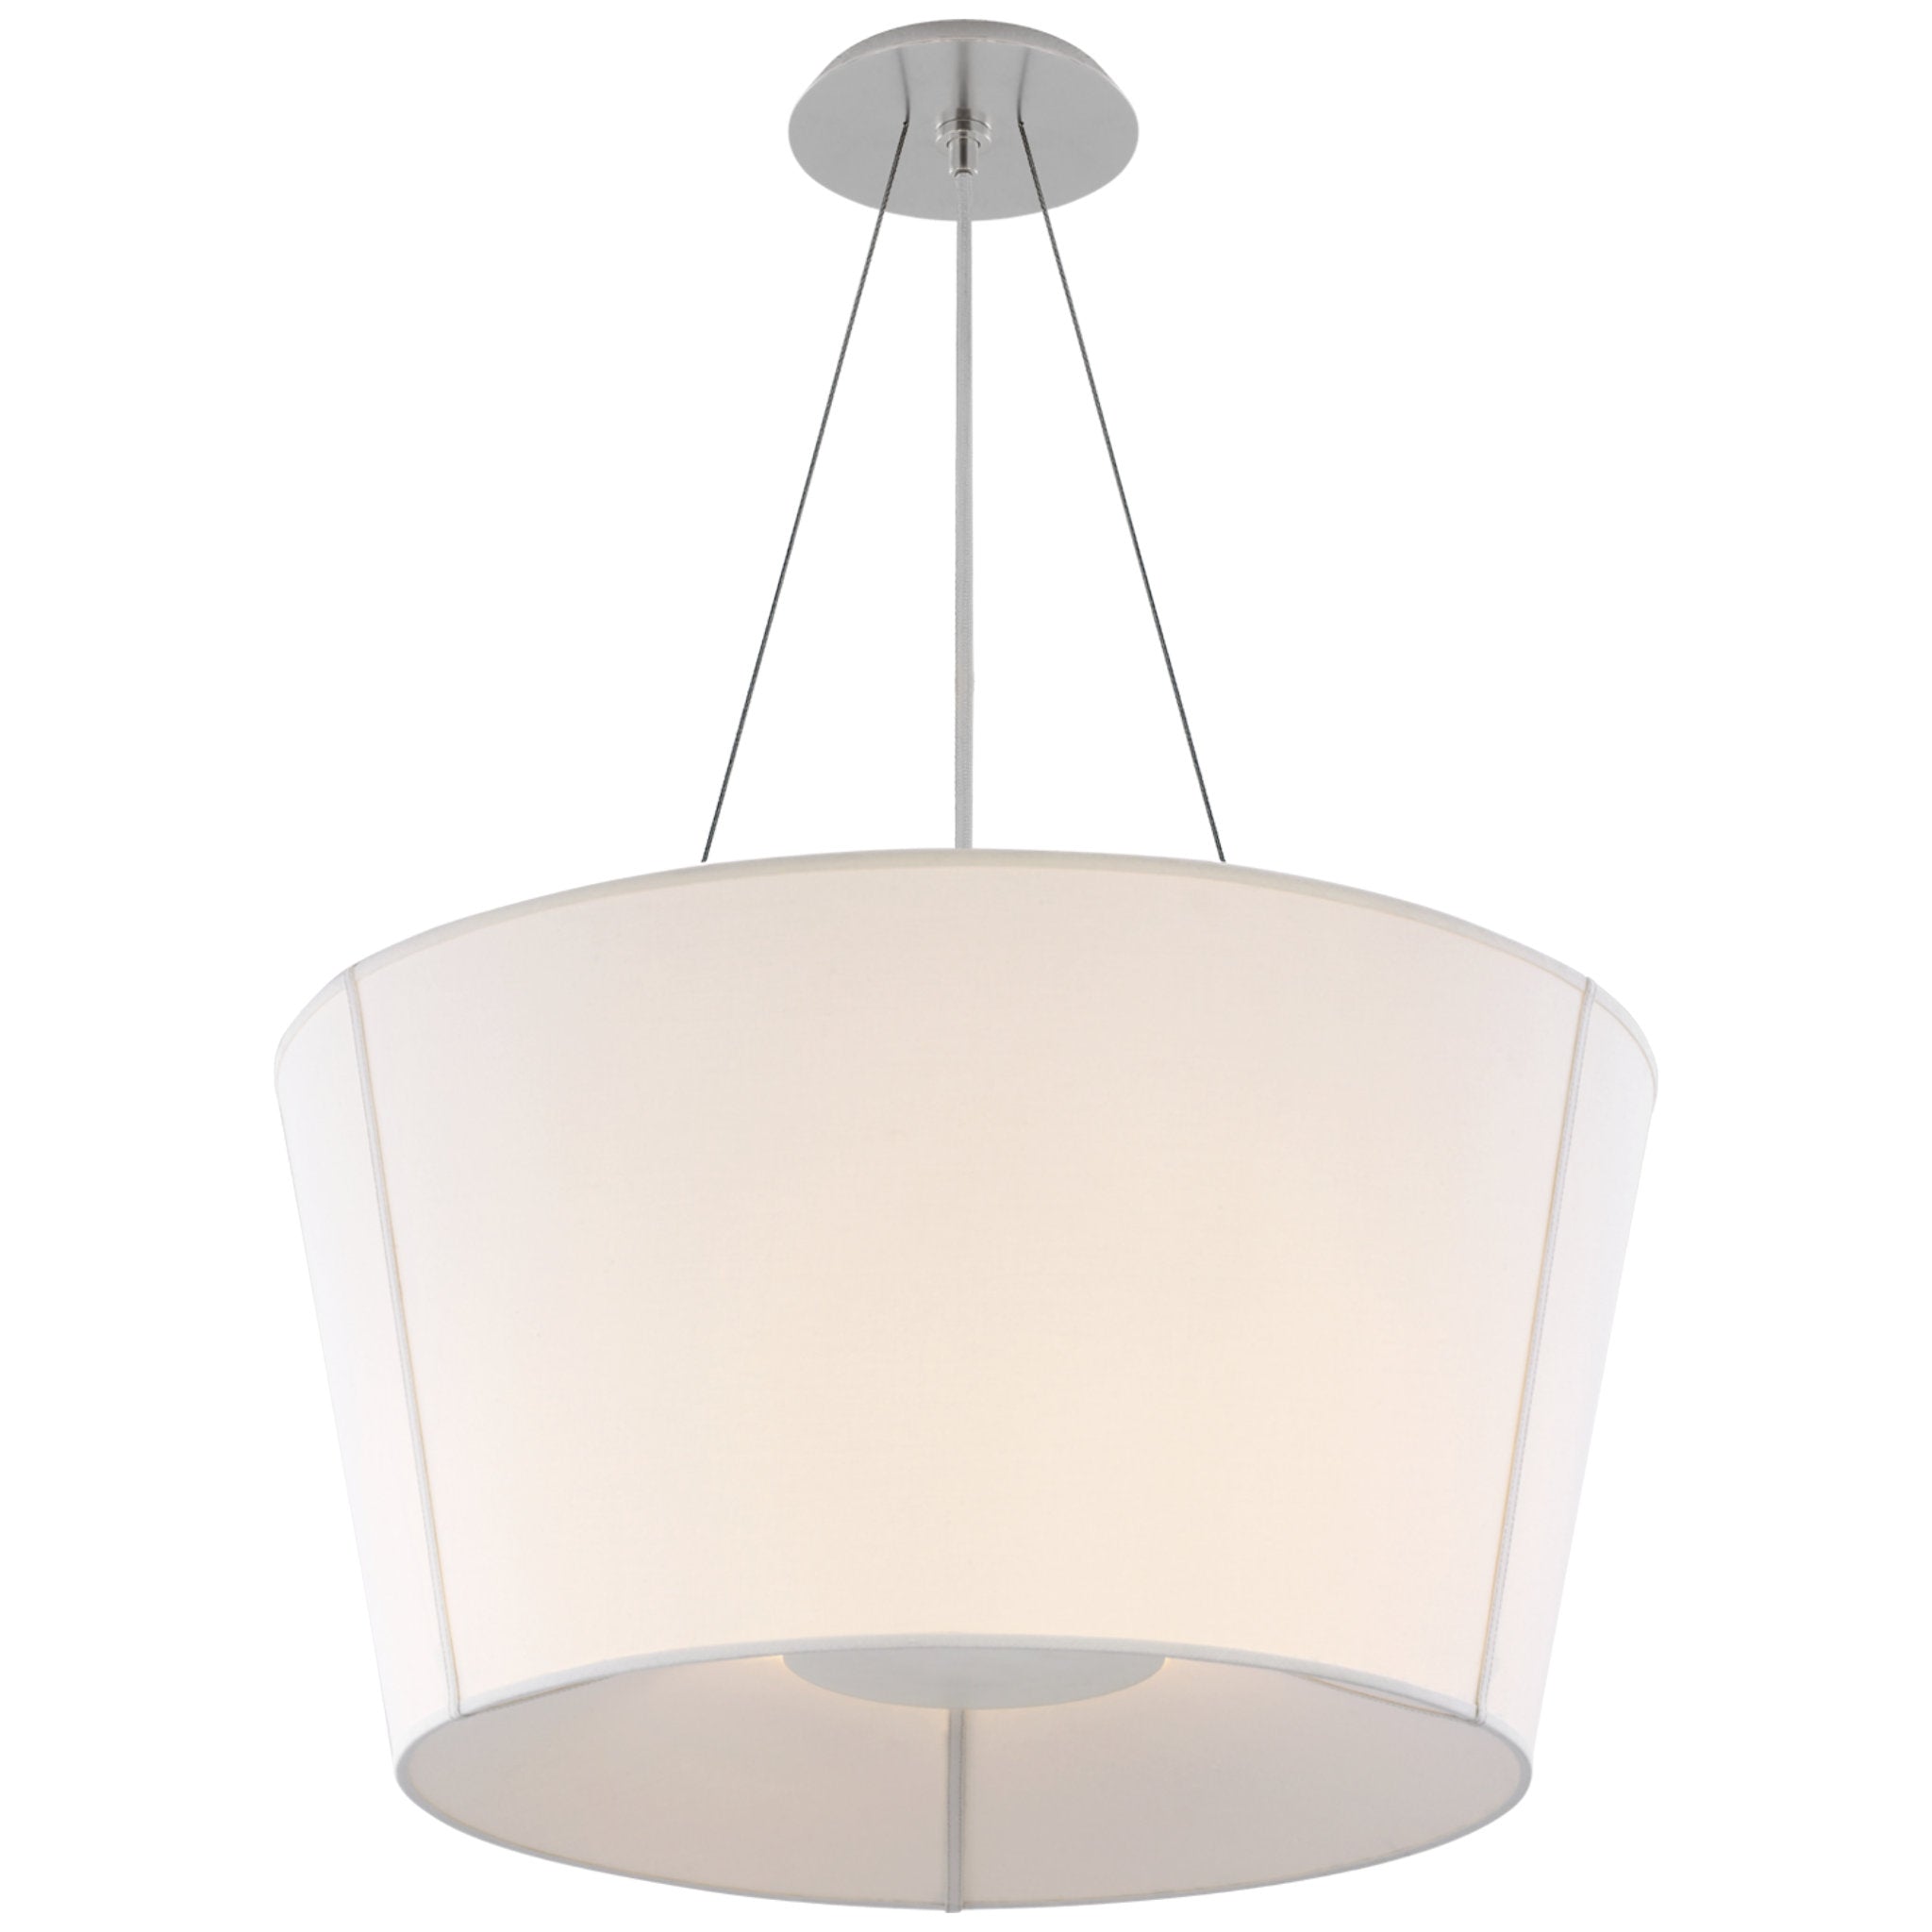 Barbara Barry Hoop Medium Inverted Hanging Shade in Soft Silver with Linen Shade